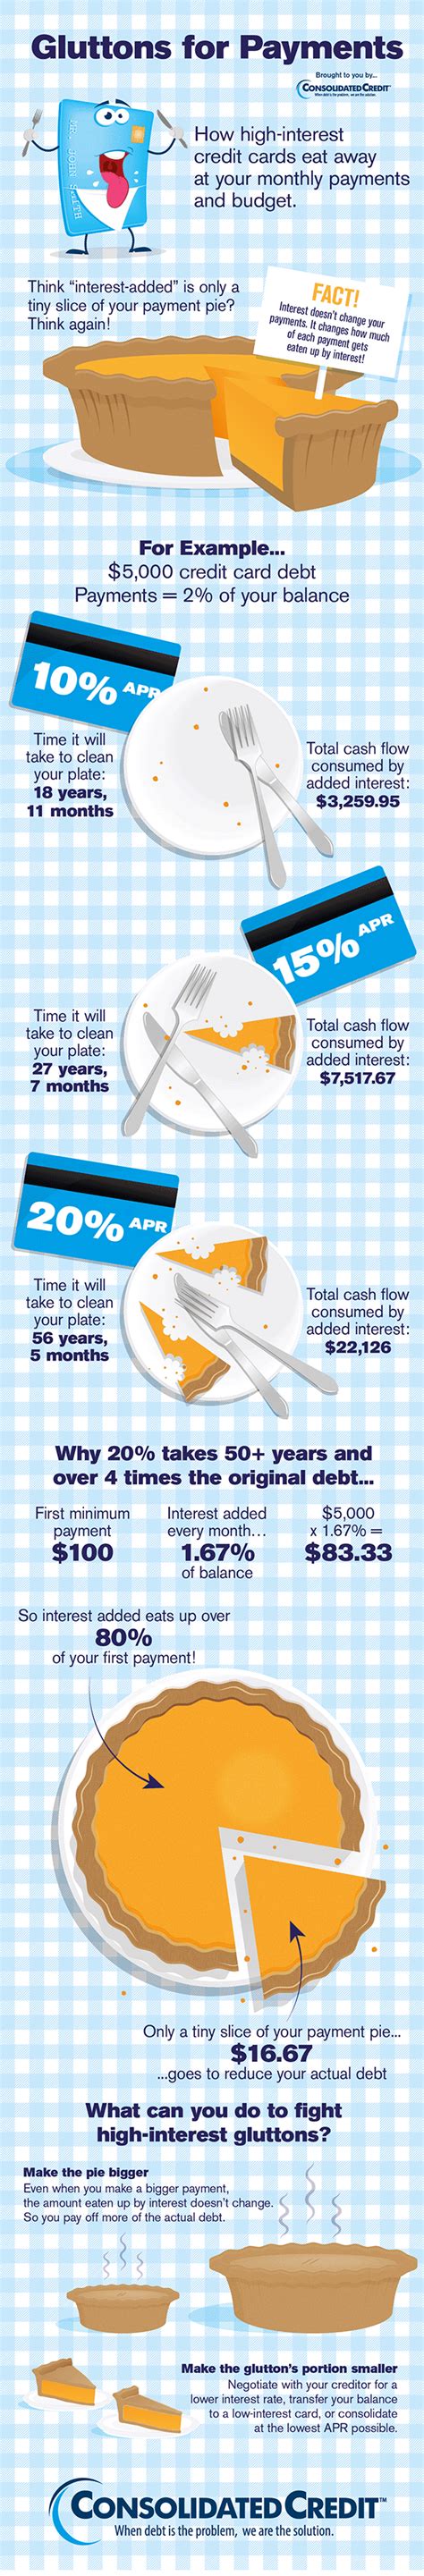 Who profits from interest on credit card debt. Credit Card APR Infographic | Consolidated Credit